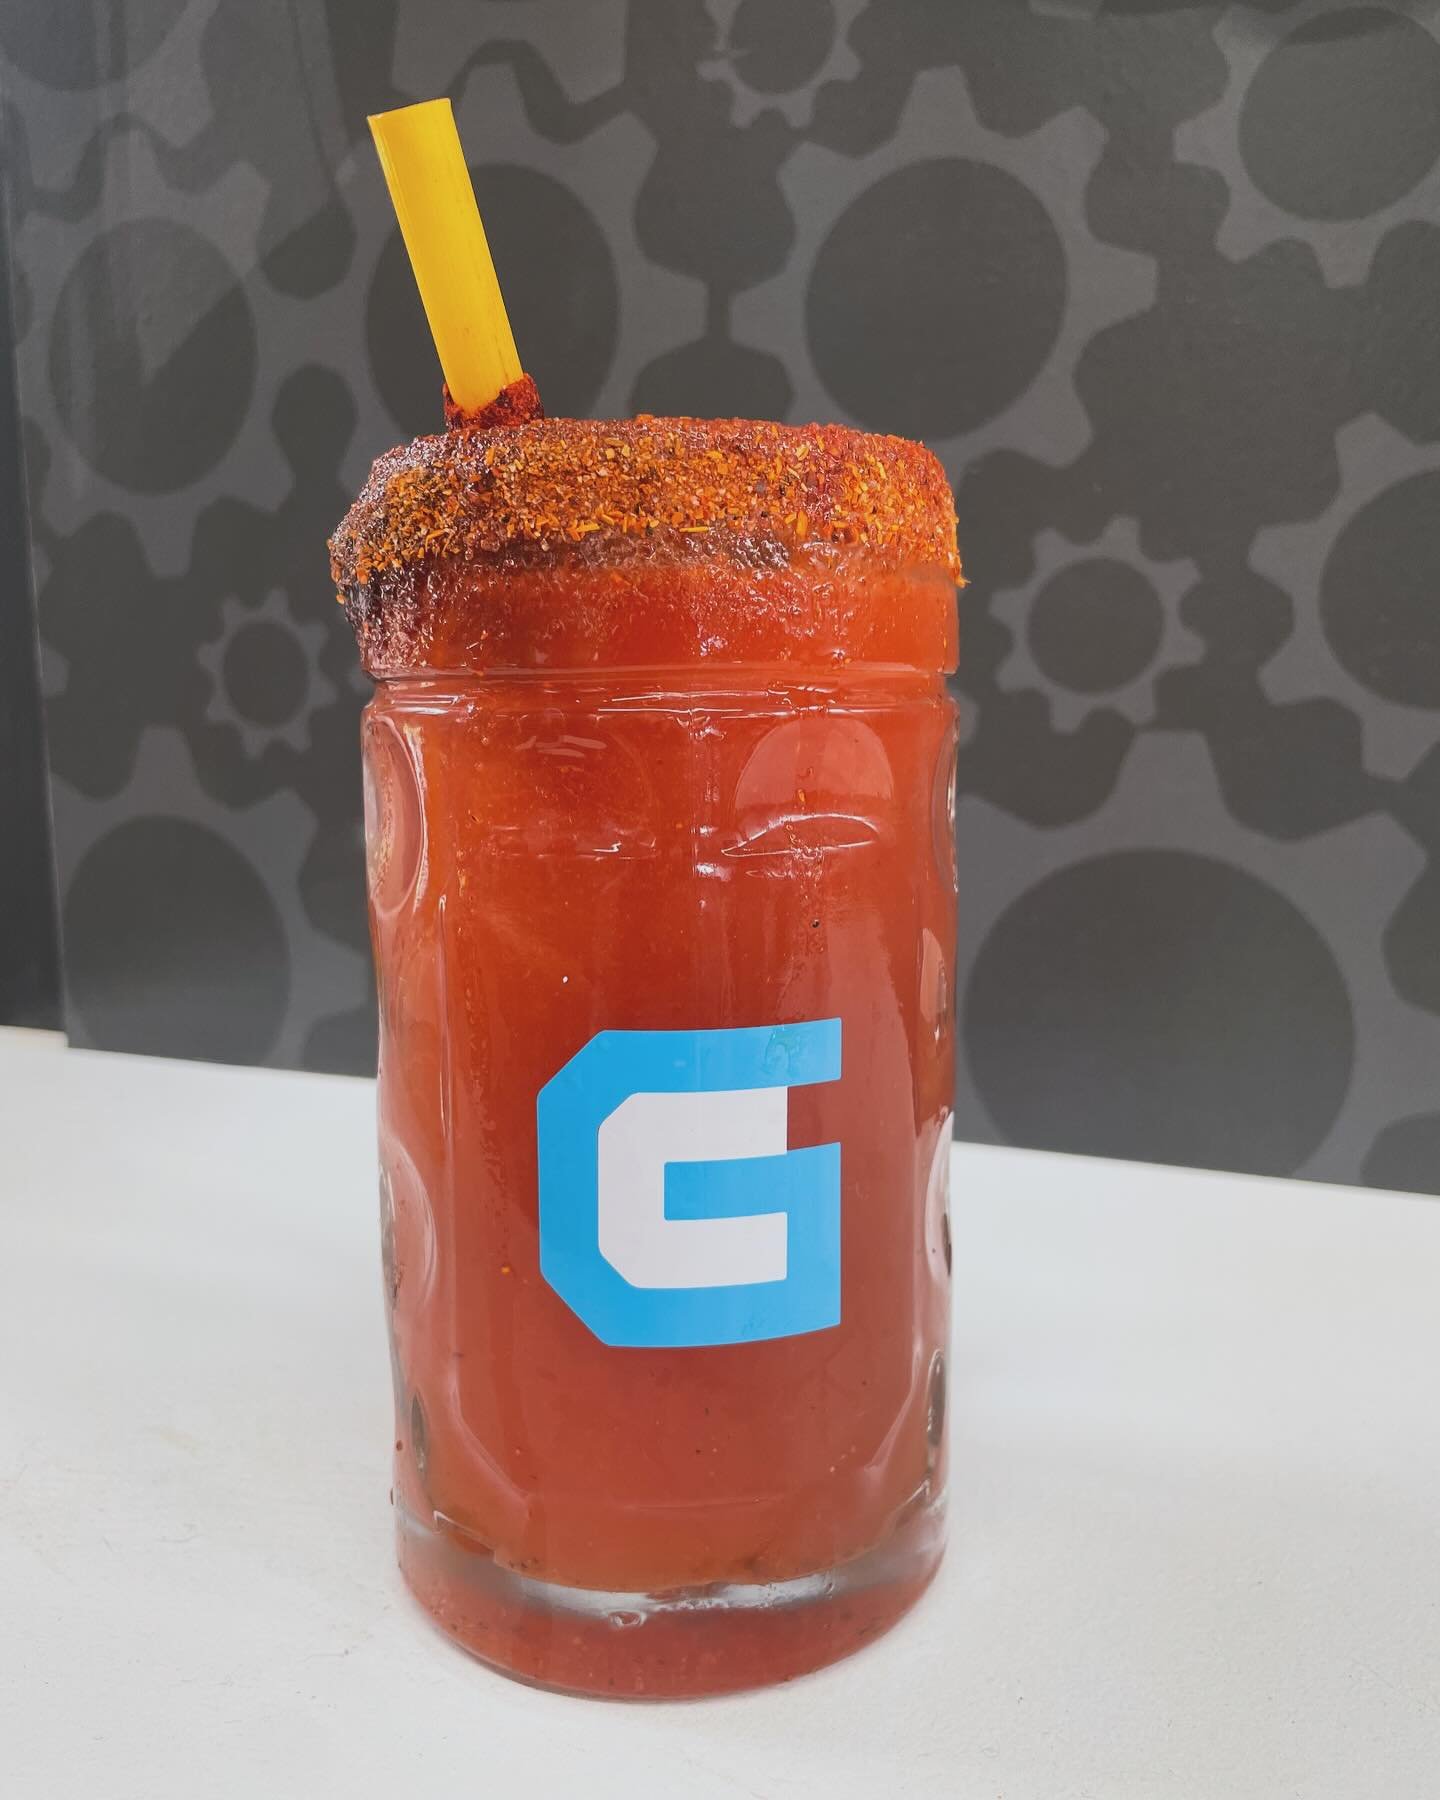 Cinco de Mayo in full swing! Grab a Michelada with Los Santos Lager for a limited time! Complete with chamoy and tajin. Served in 1-liter tankards

Plus amazing food from @huguisbirriatacos 

#CincoDeMayo #anaheimbeer #gamecraftanaheim #mexicanlager